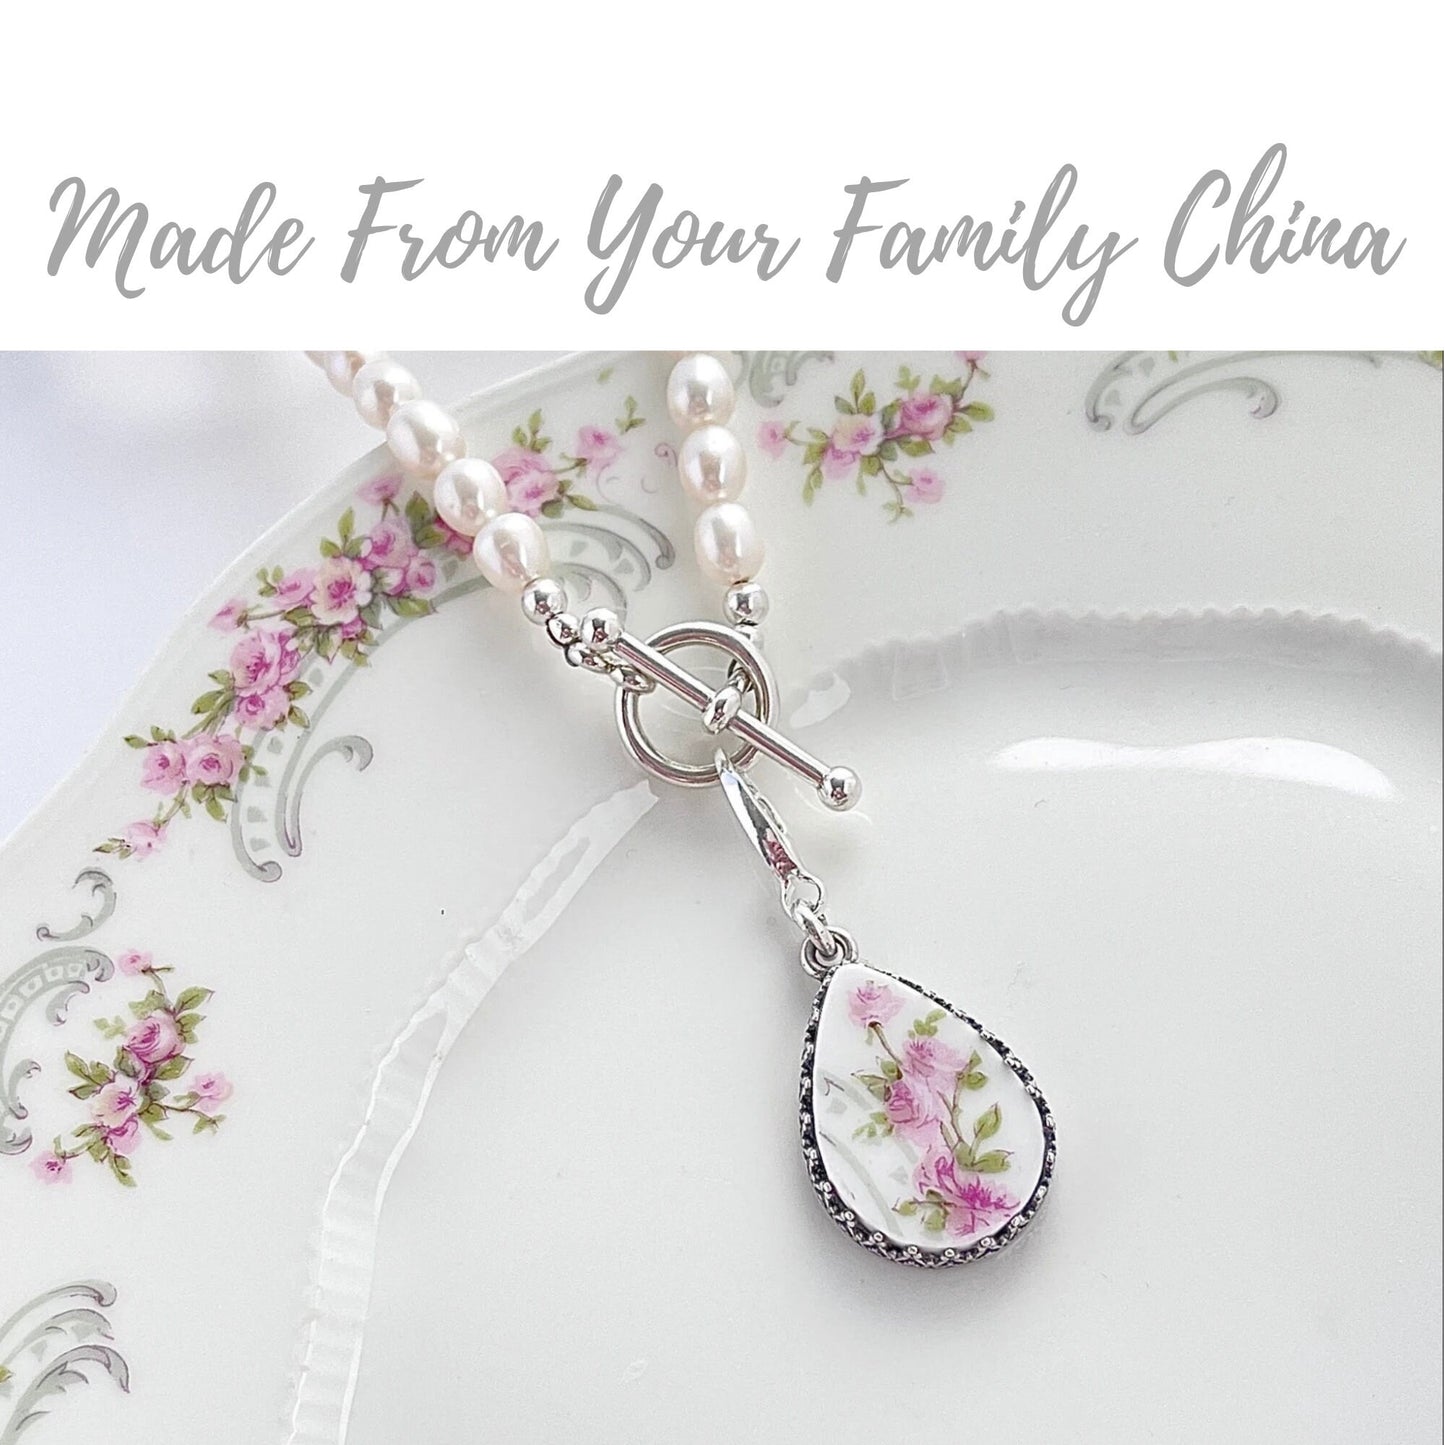 CUSTOM ORDER Pearl Toggle China Necklace, Broken China Jewelry, Unique 20th Anniversary Gift for Wife, Sterling Silver Jewelry, Custom Made